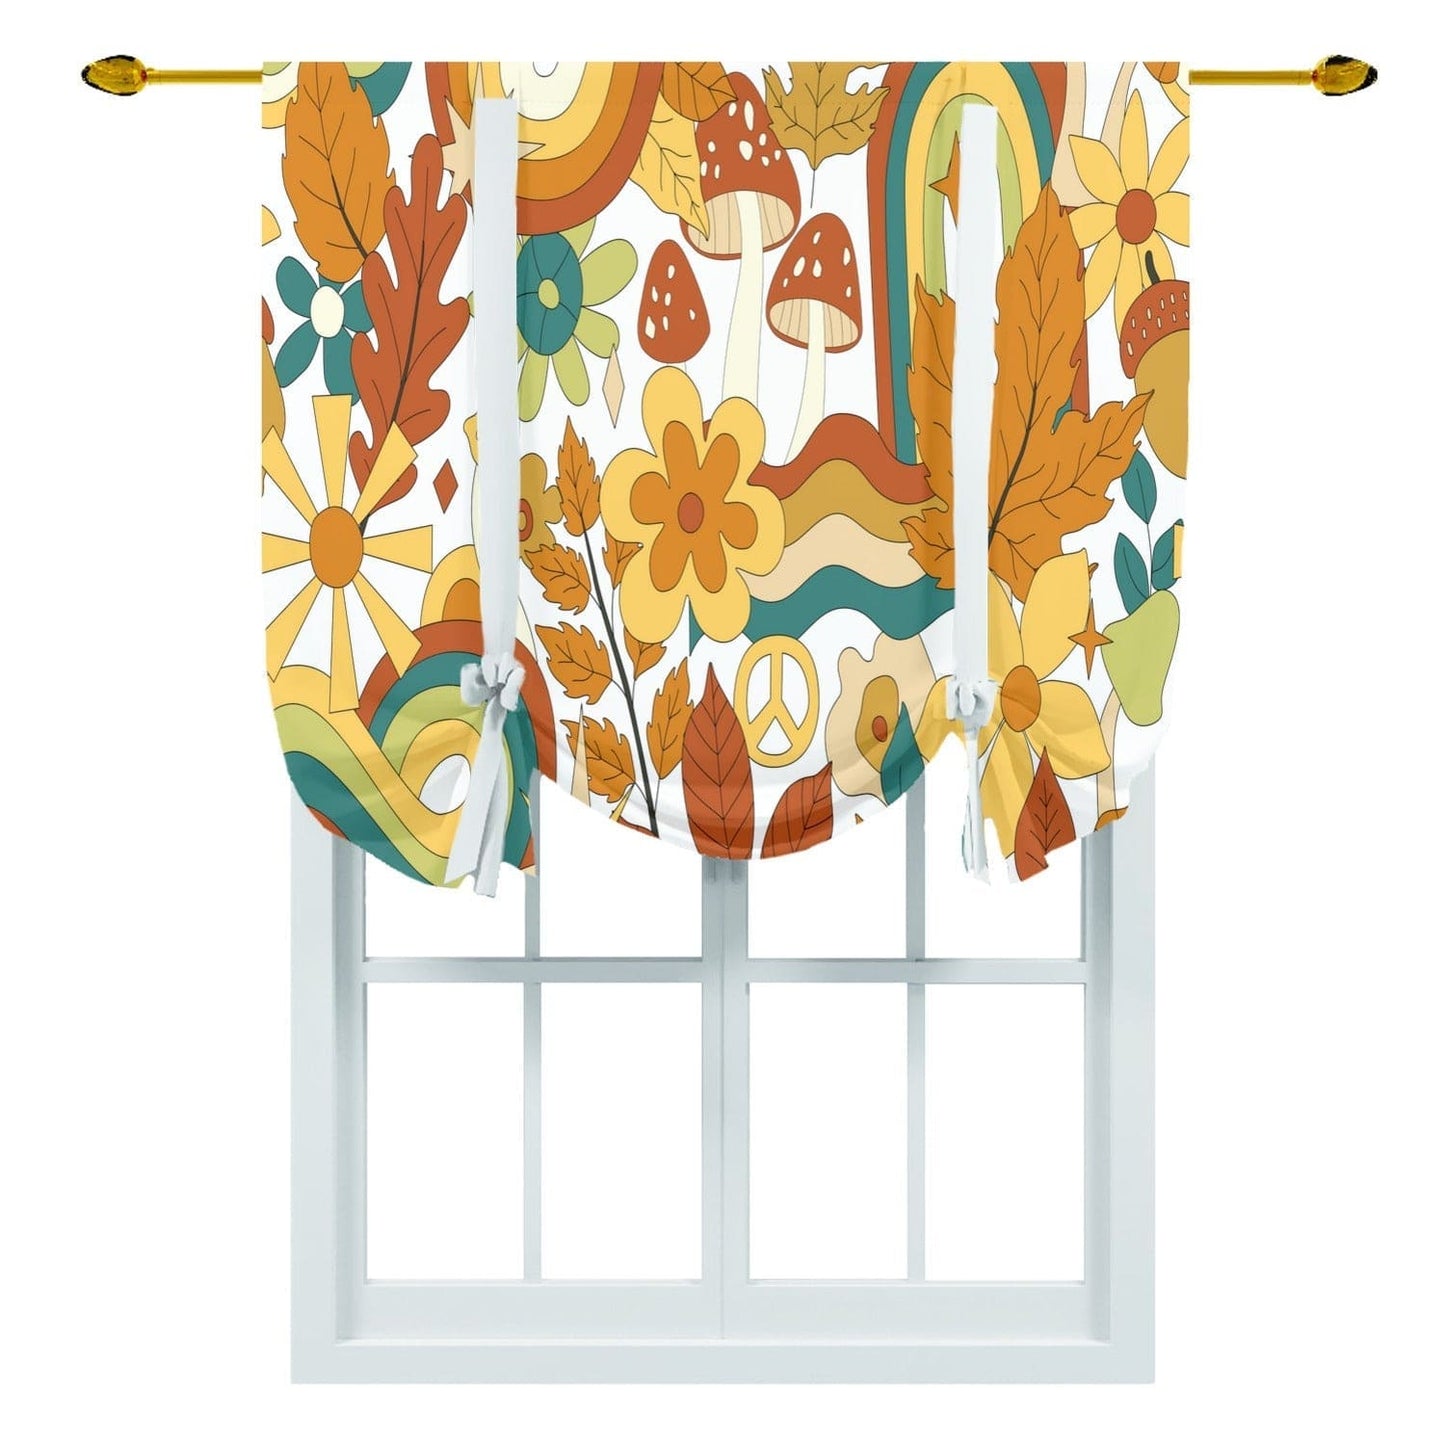 kate-mcenroe-nyc Roll Up Curtain in 70s Groovy Hippie Retro Mid Century Modern Curtains 55845